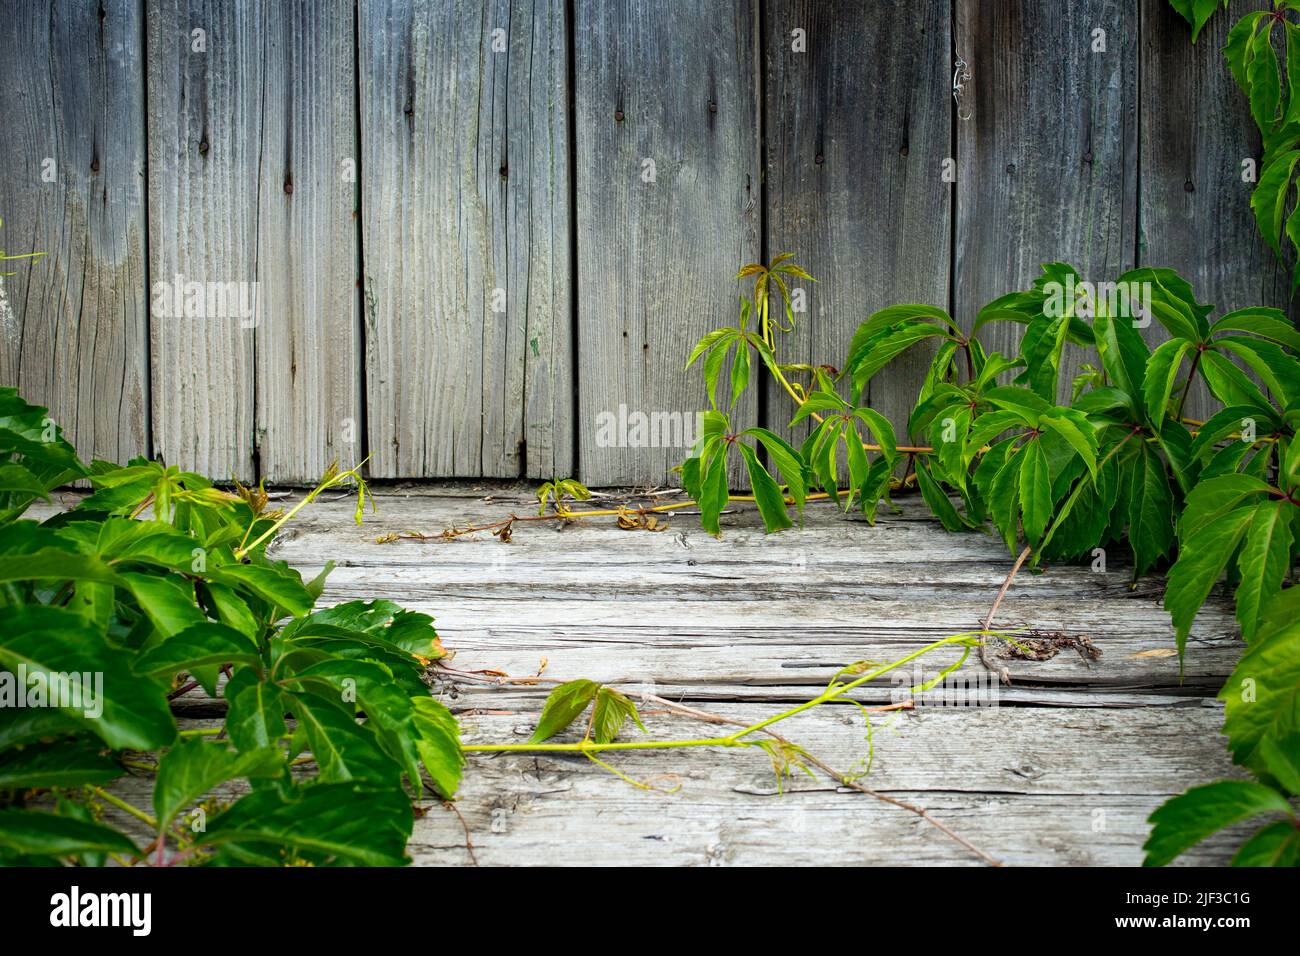 Virginia creeper or victoria creeper vines on a weathered wood boards deck. Product display backdrop. Stock Photo